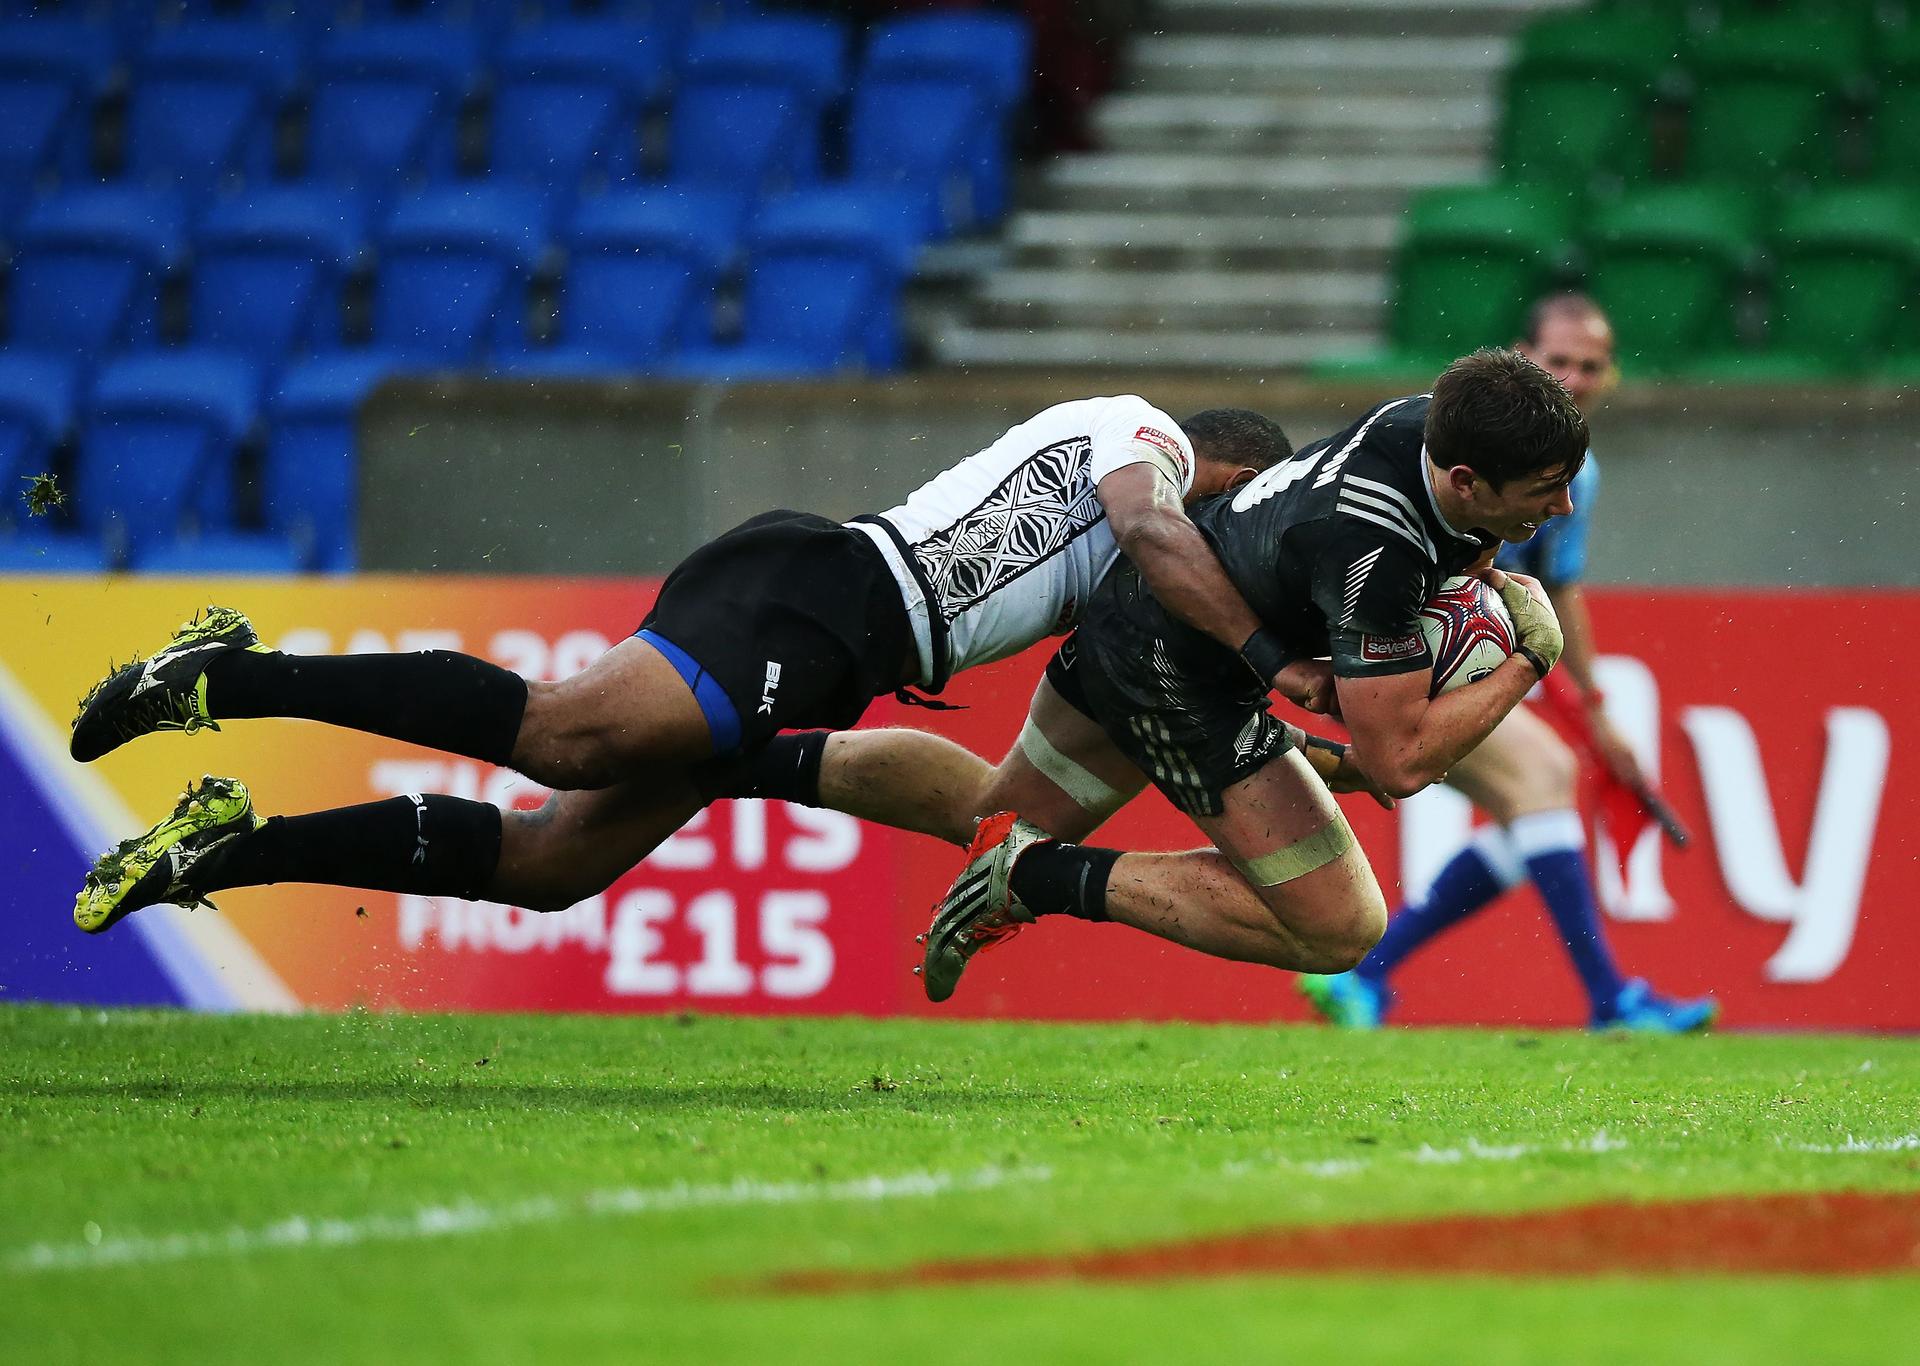 Fiji beat New Zealand in the Glasgow Sevens Cup final last weekend to move top of the Sevens World Series standings. Photo: AFP